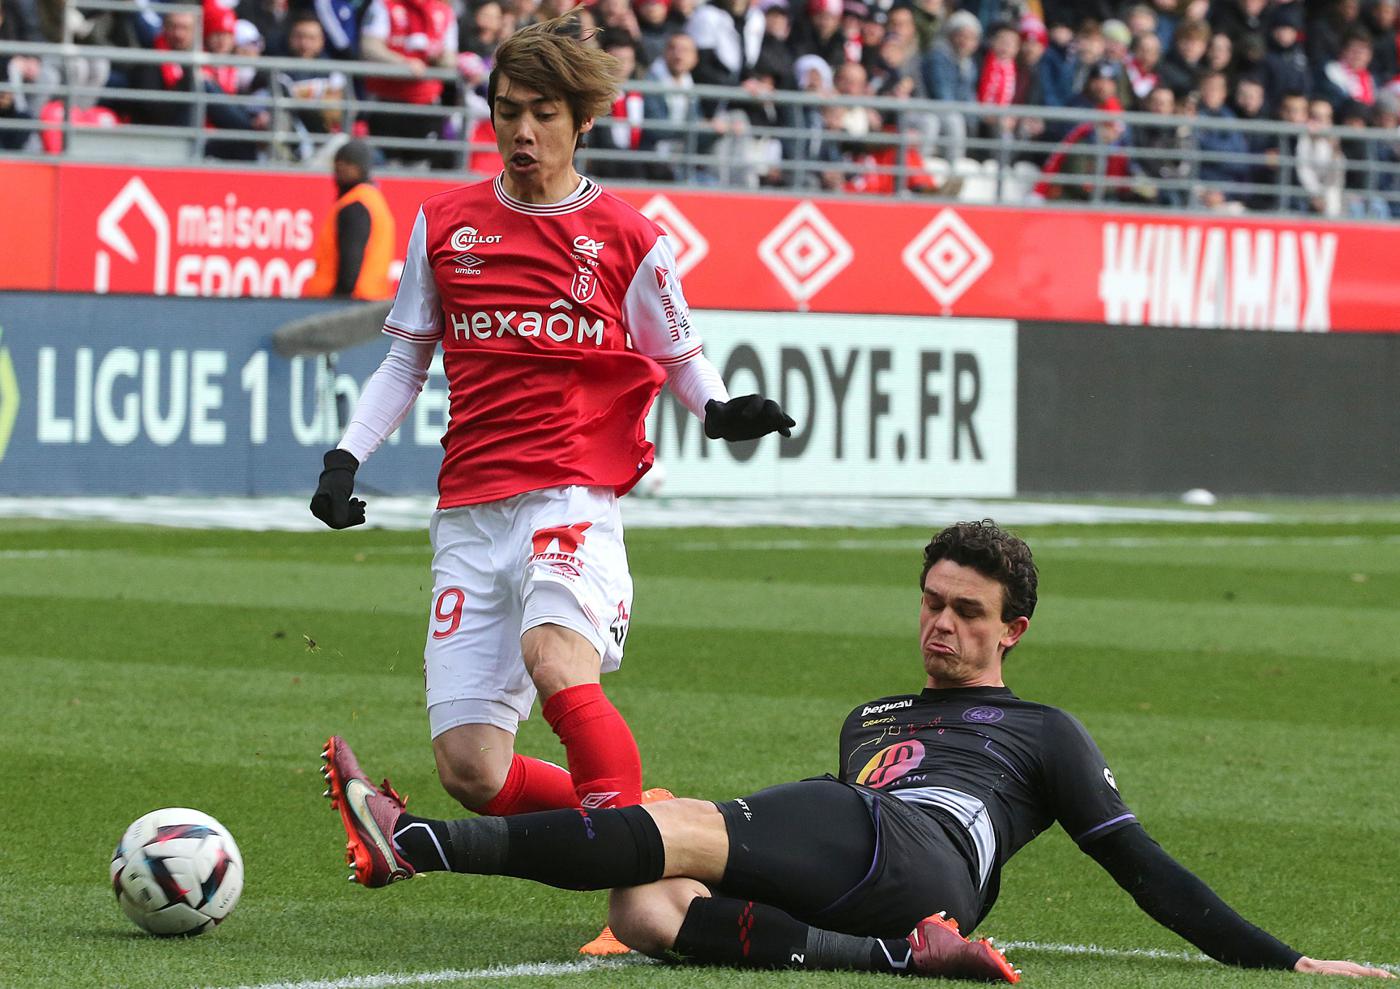 Reims - Toulouse - 3:0. French Premier League, 25th round. Match Review, Statistics